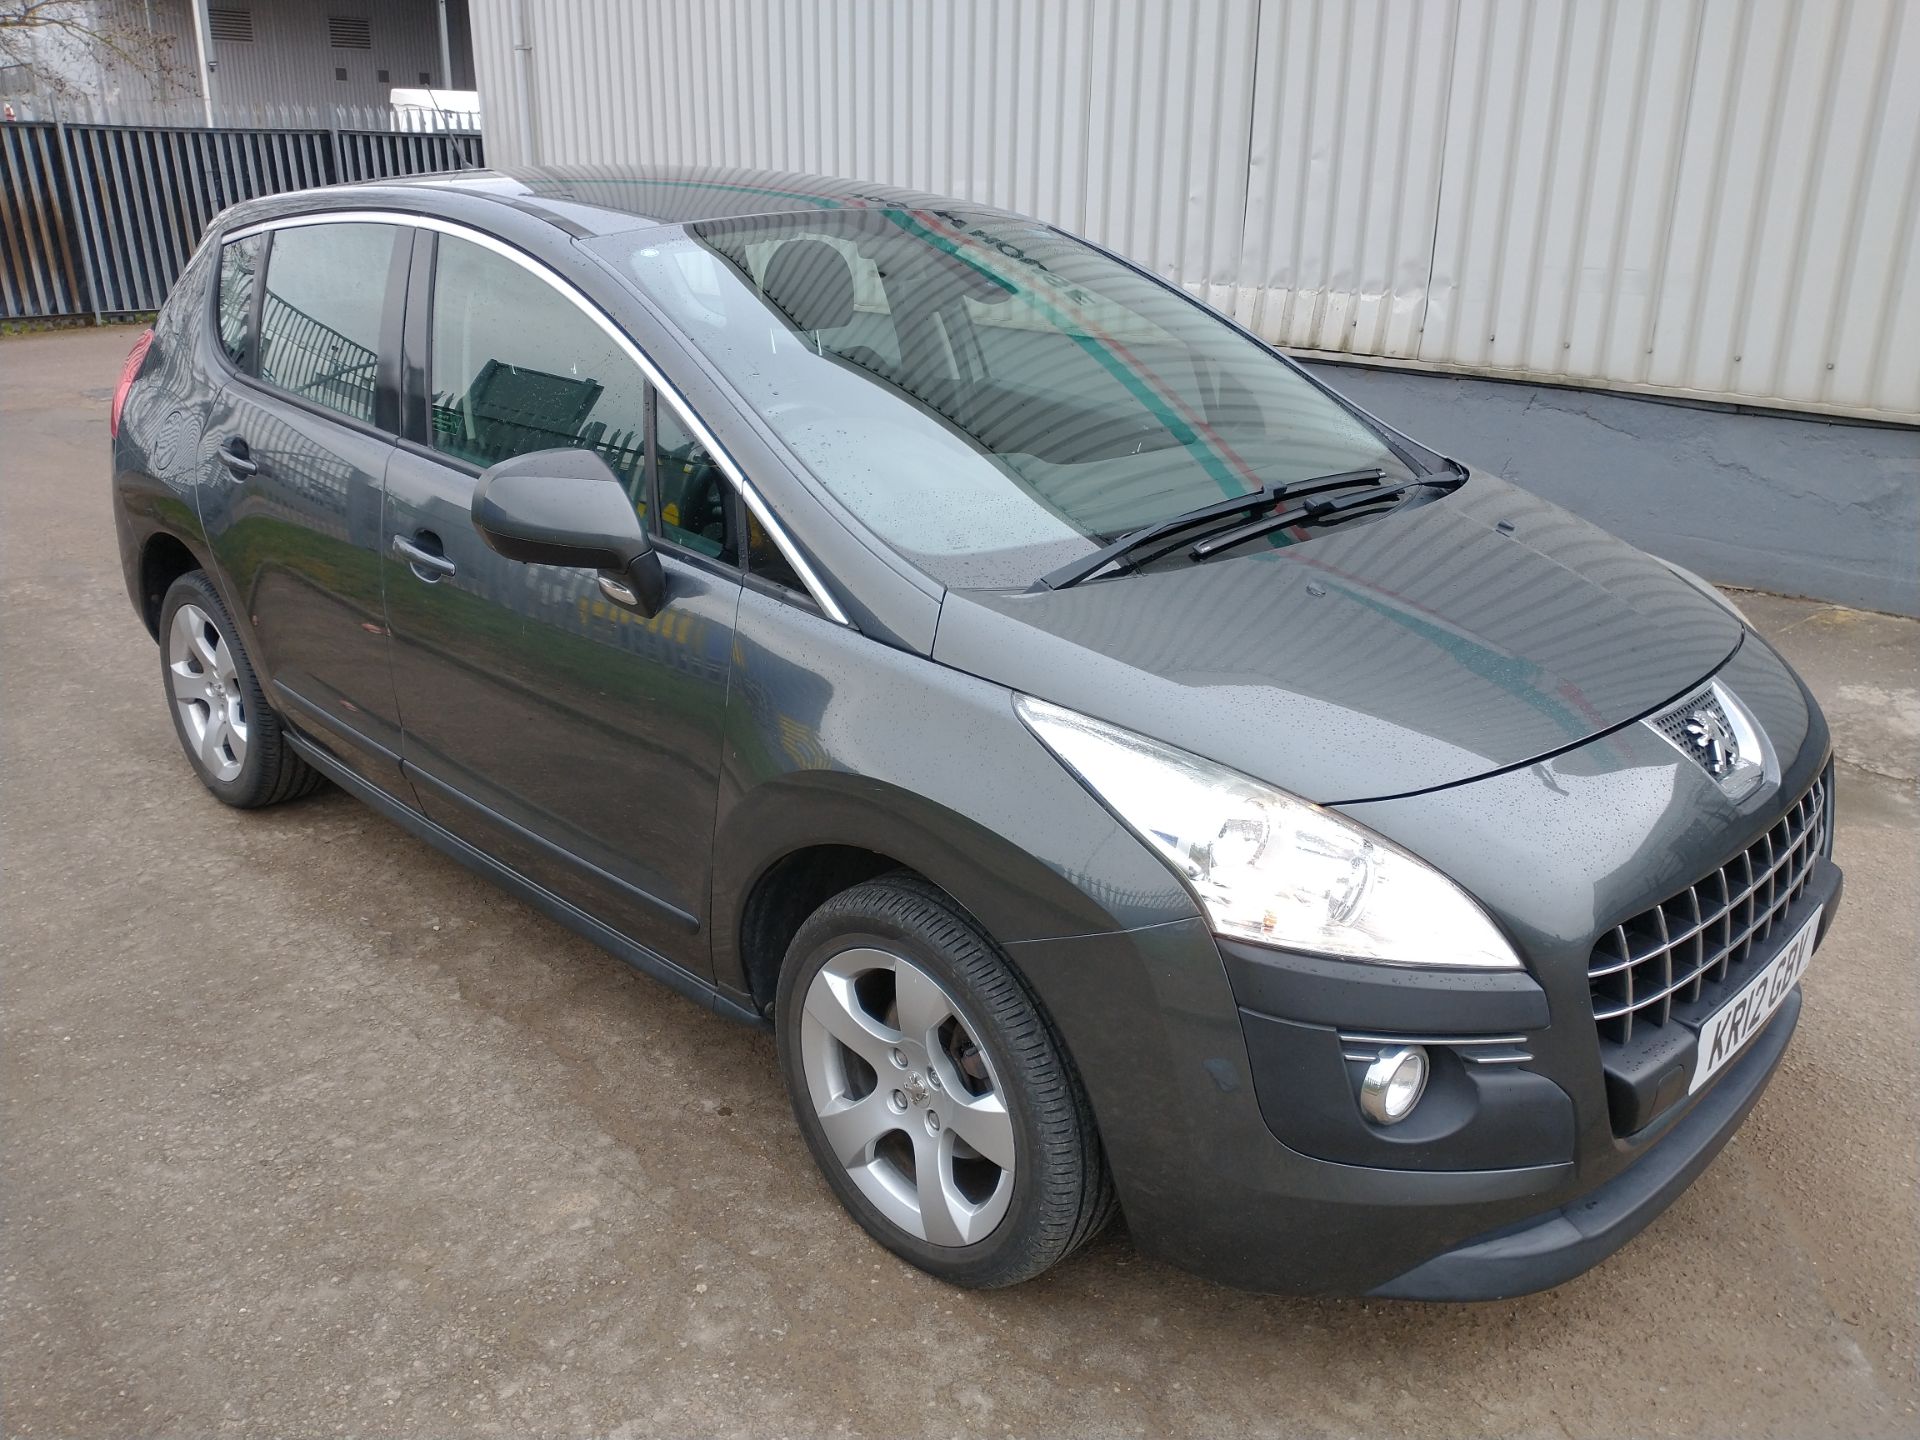 2012 Peugeot 3008 Active HDI 1.6 5DR SUV - CL505 - NO VAT ON THE HAMM - Image 8 of 19